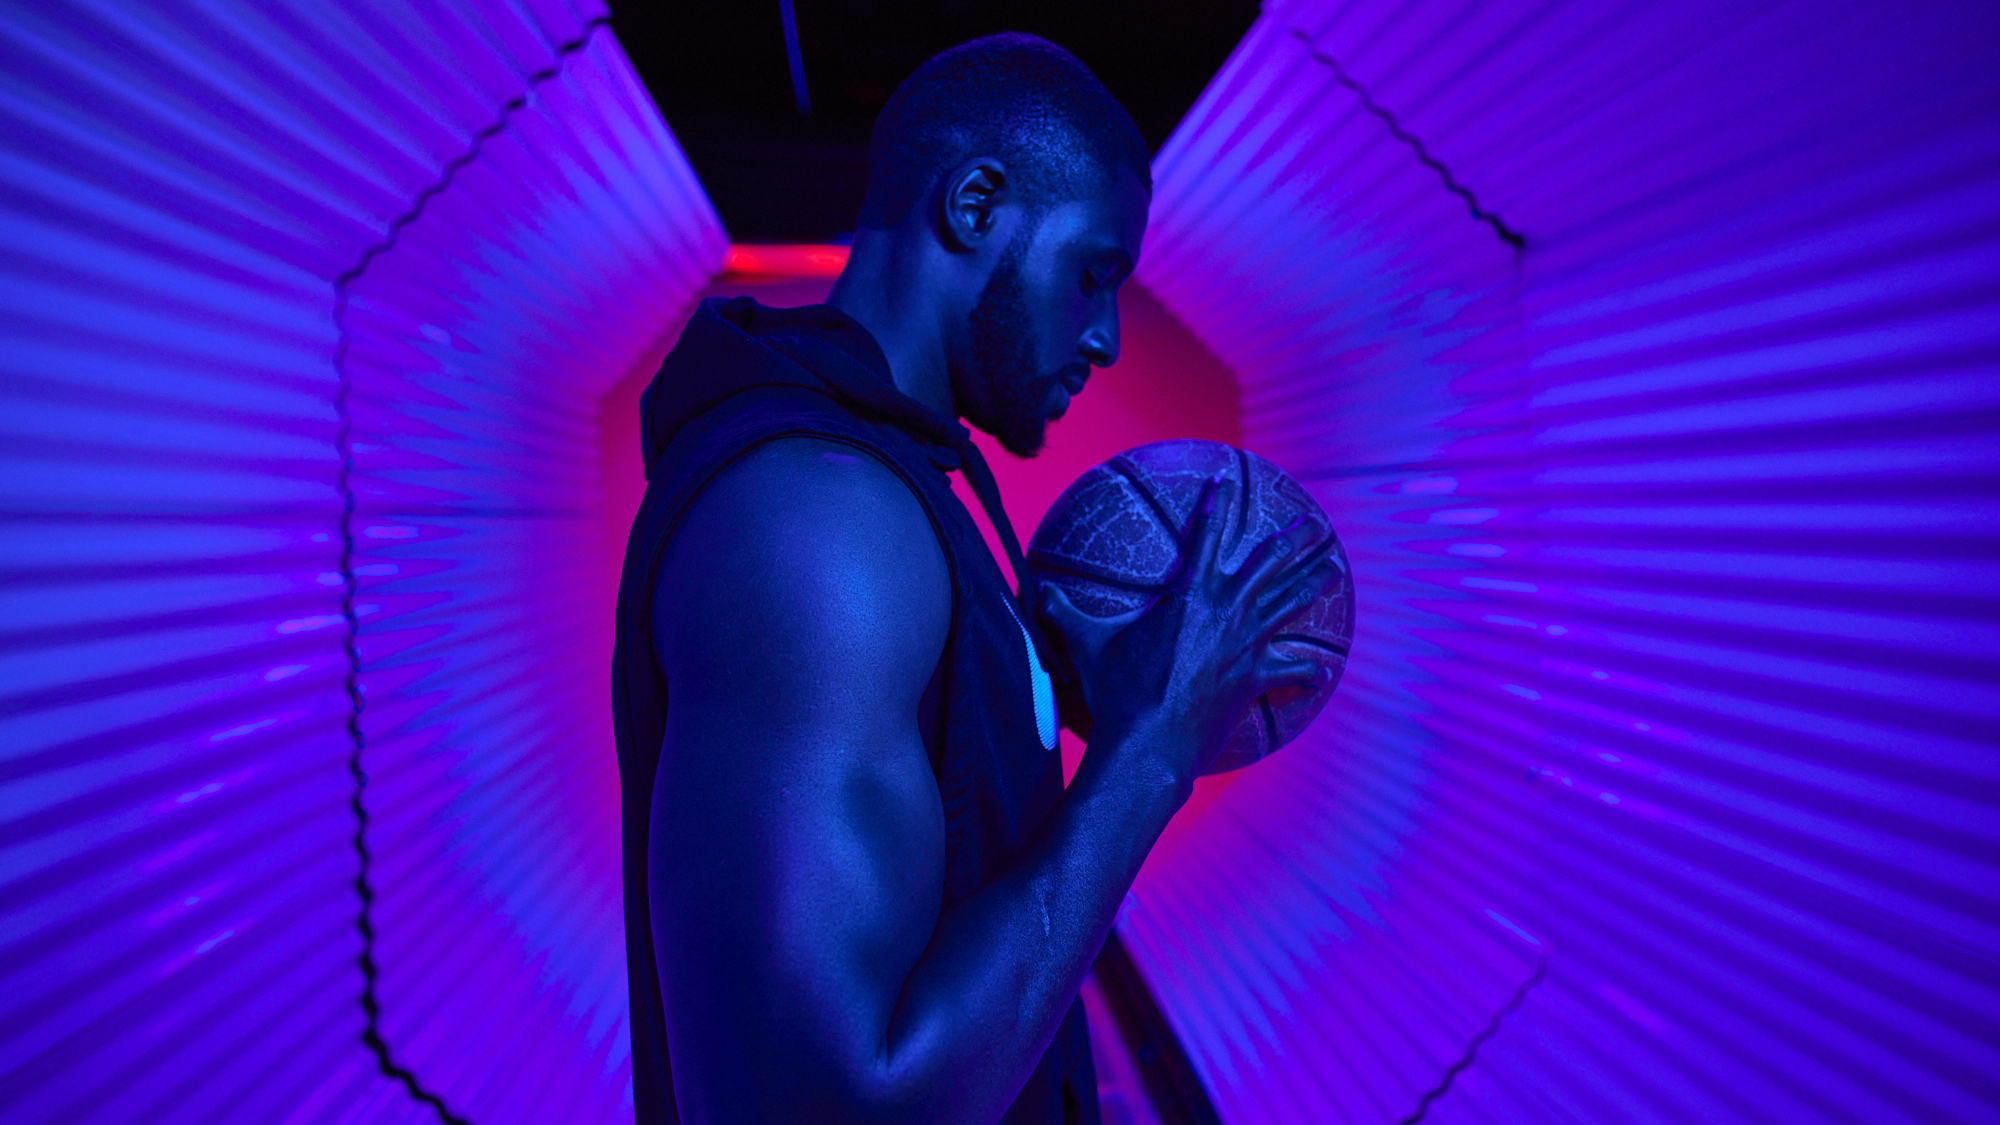 Basketball Portrait from Madness a photography series by Los Angeles based photographer director and cinematographer motion film Christopher malcolm